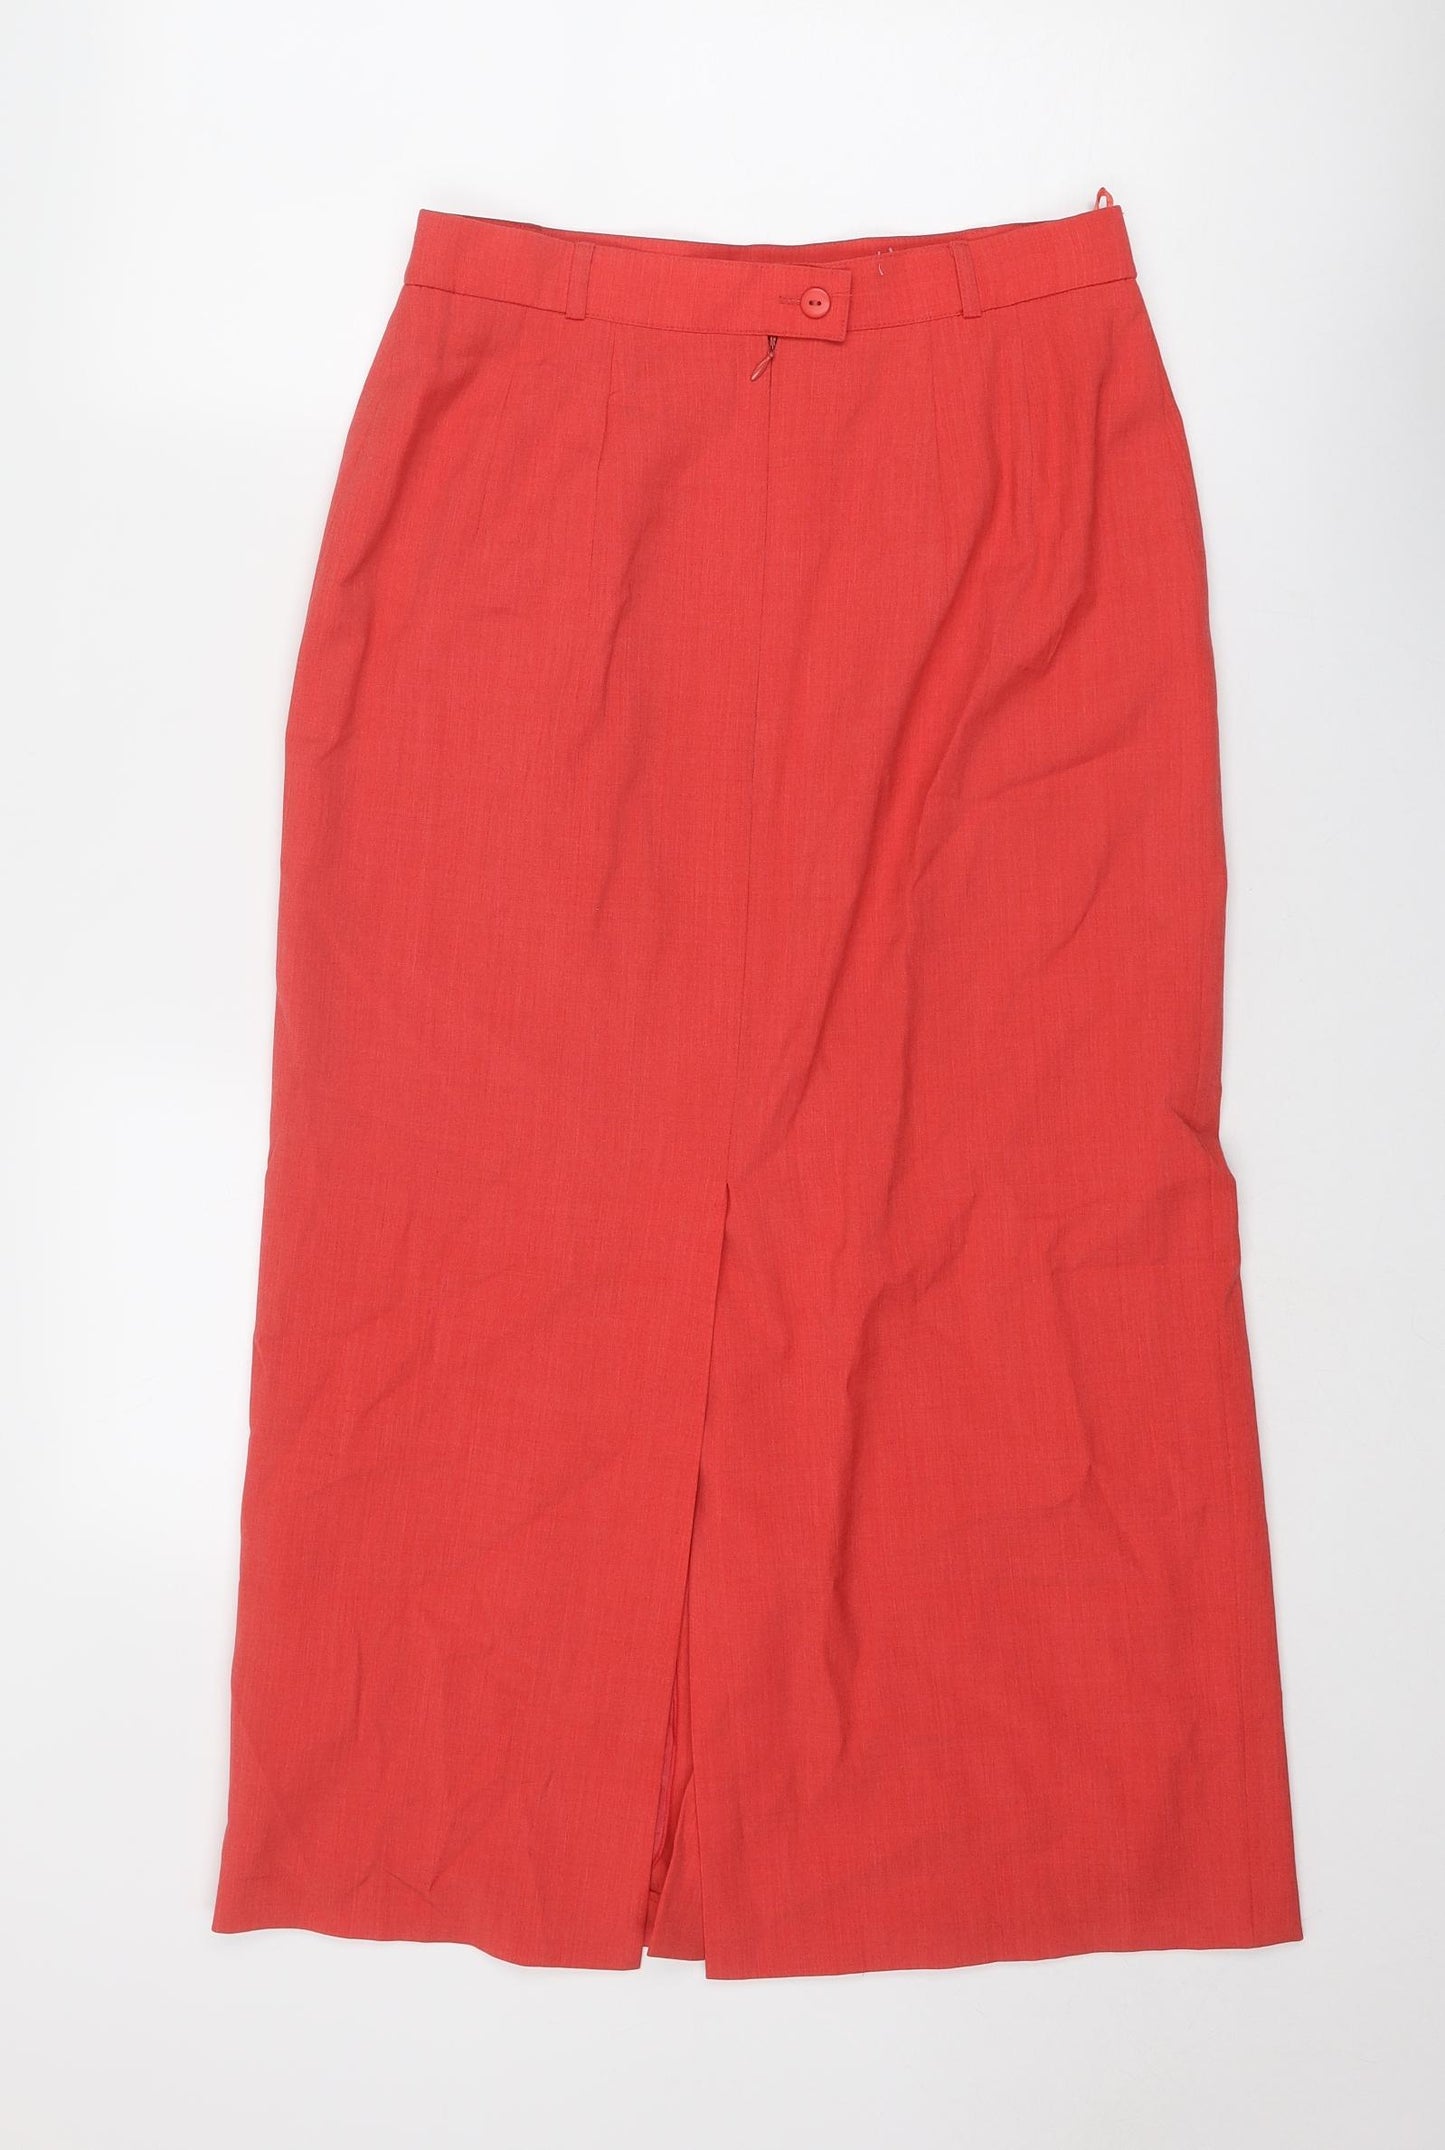 Basler Womens Red Polyester A-Line Skirt Size 30 in Zip